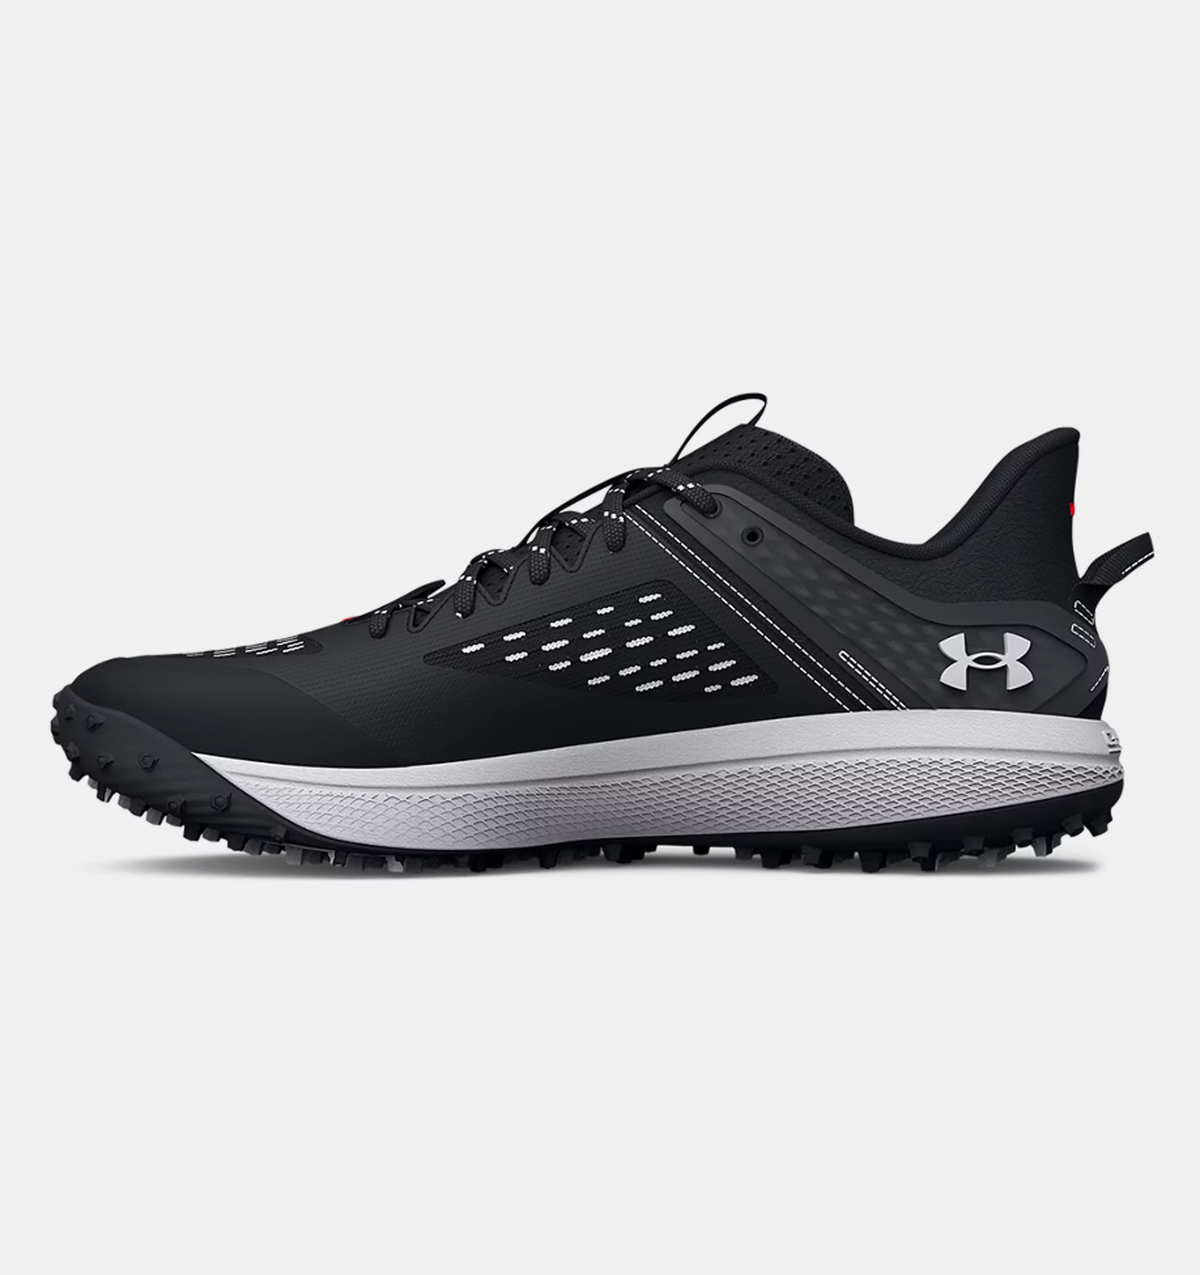 CLEAT TURF MENS UNDERARMOUR YARD BS24